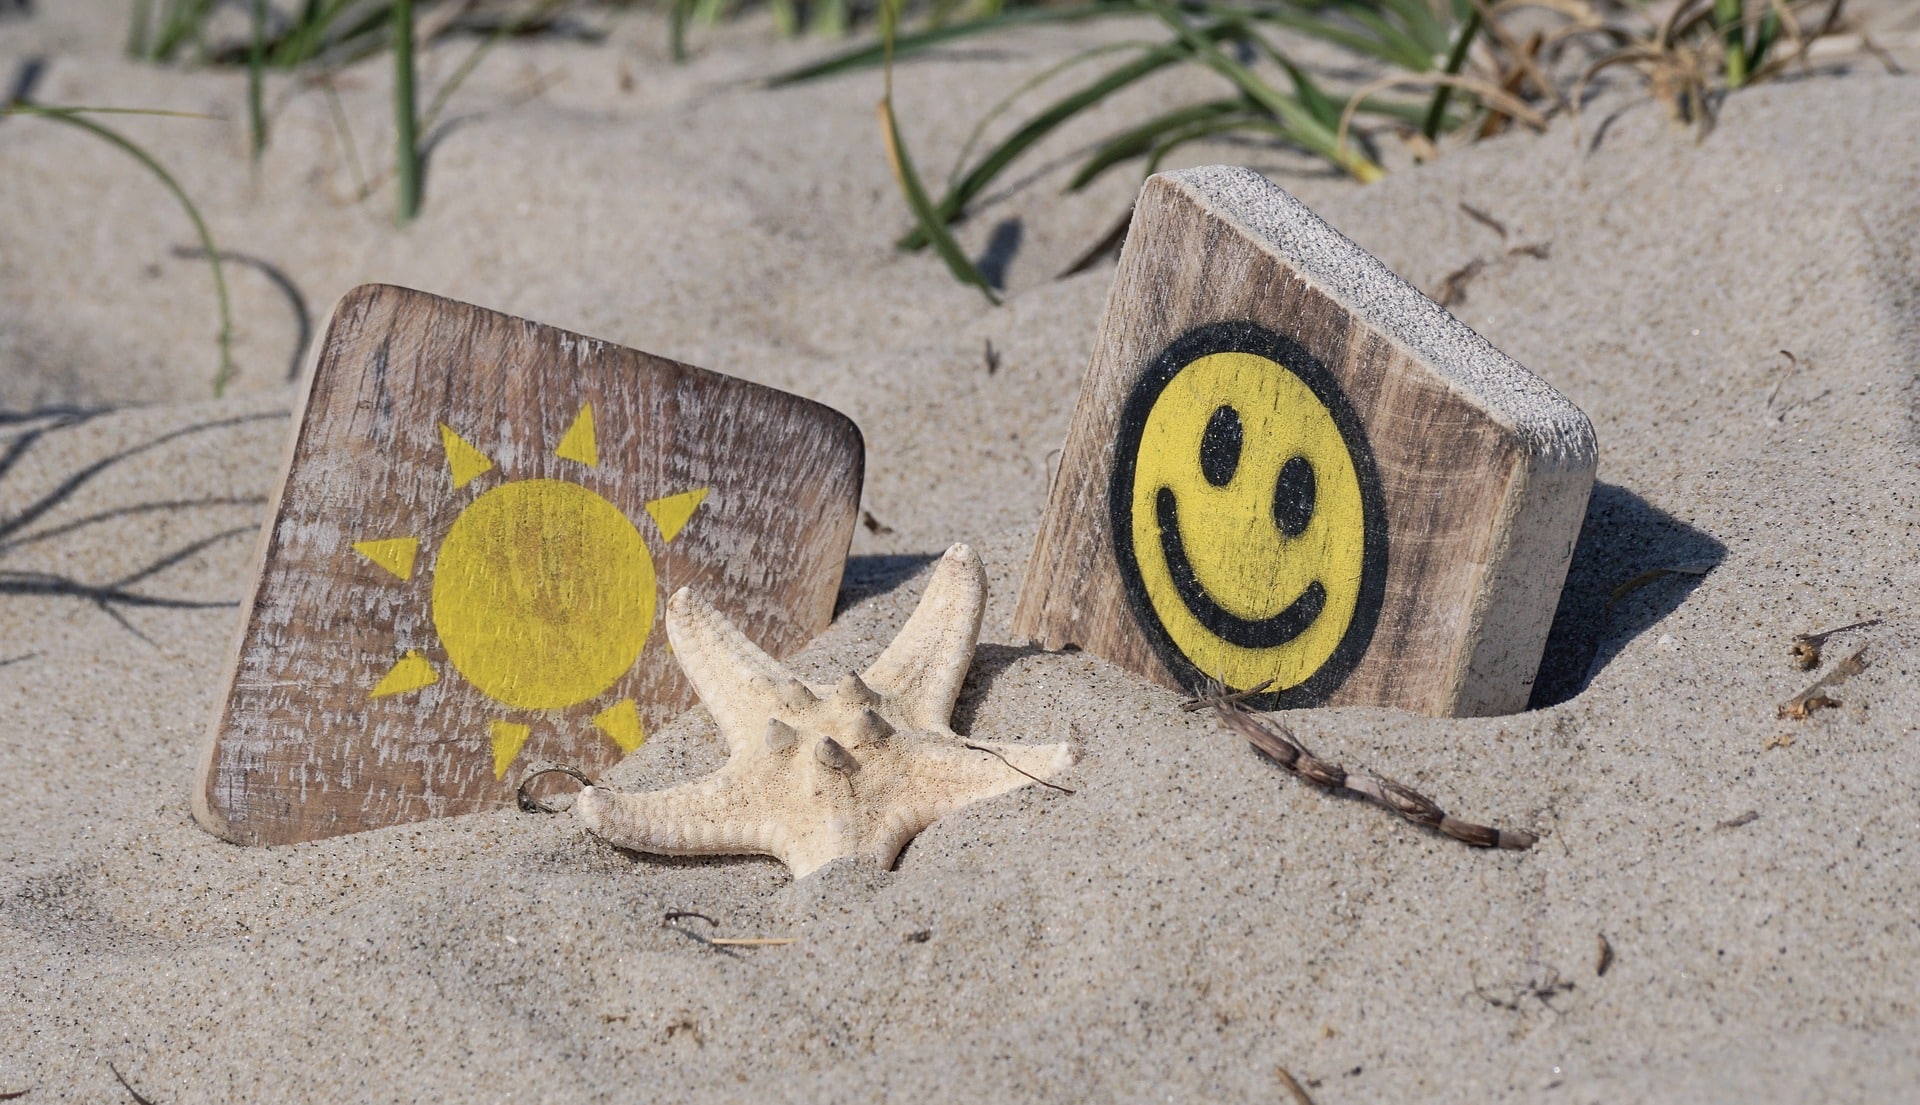 Two wooden blocks that have a sun and smiley face painted on them, in the sand surrounding a sea shell, representing summer fun